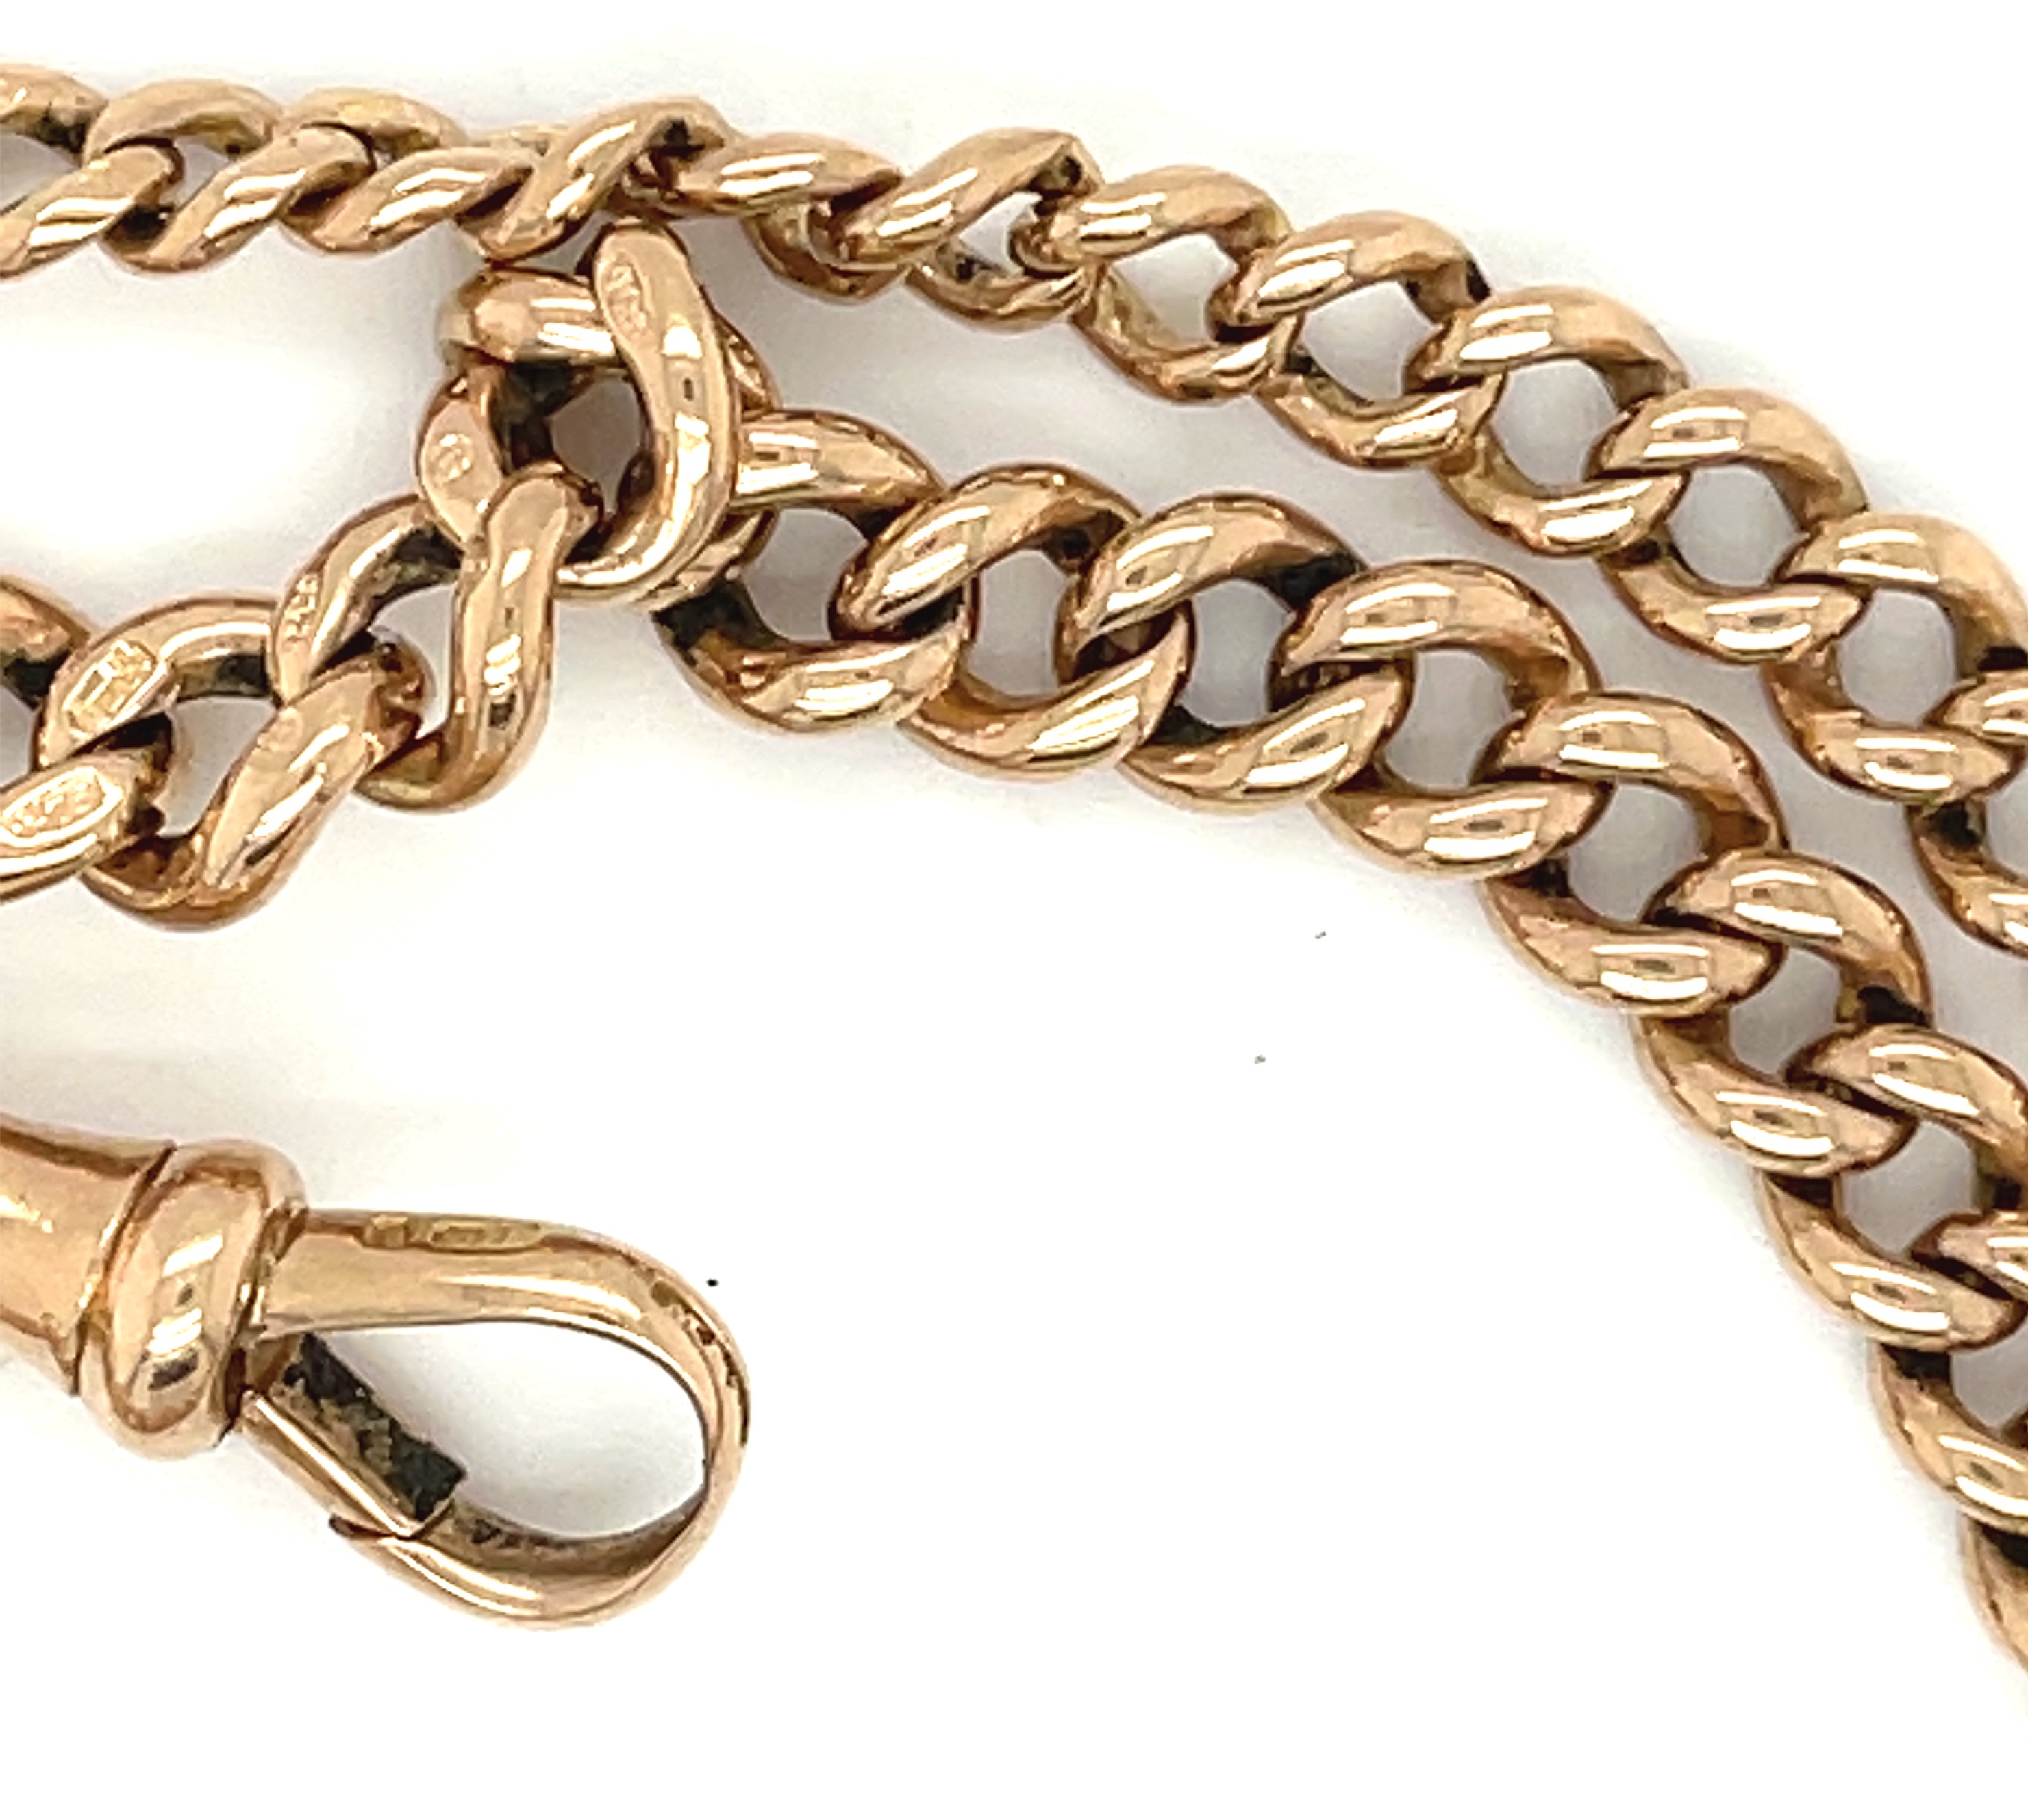 Antique 9ct Gold Watch Chain - 45.5cm long and weighing 27.4 grams. - Image 3 of 6